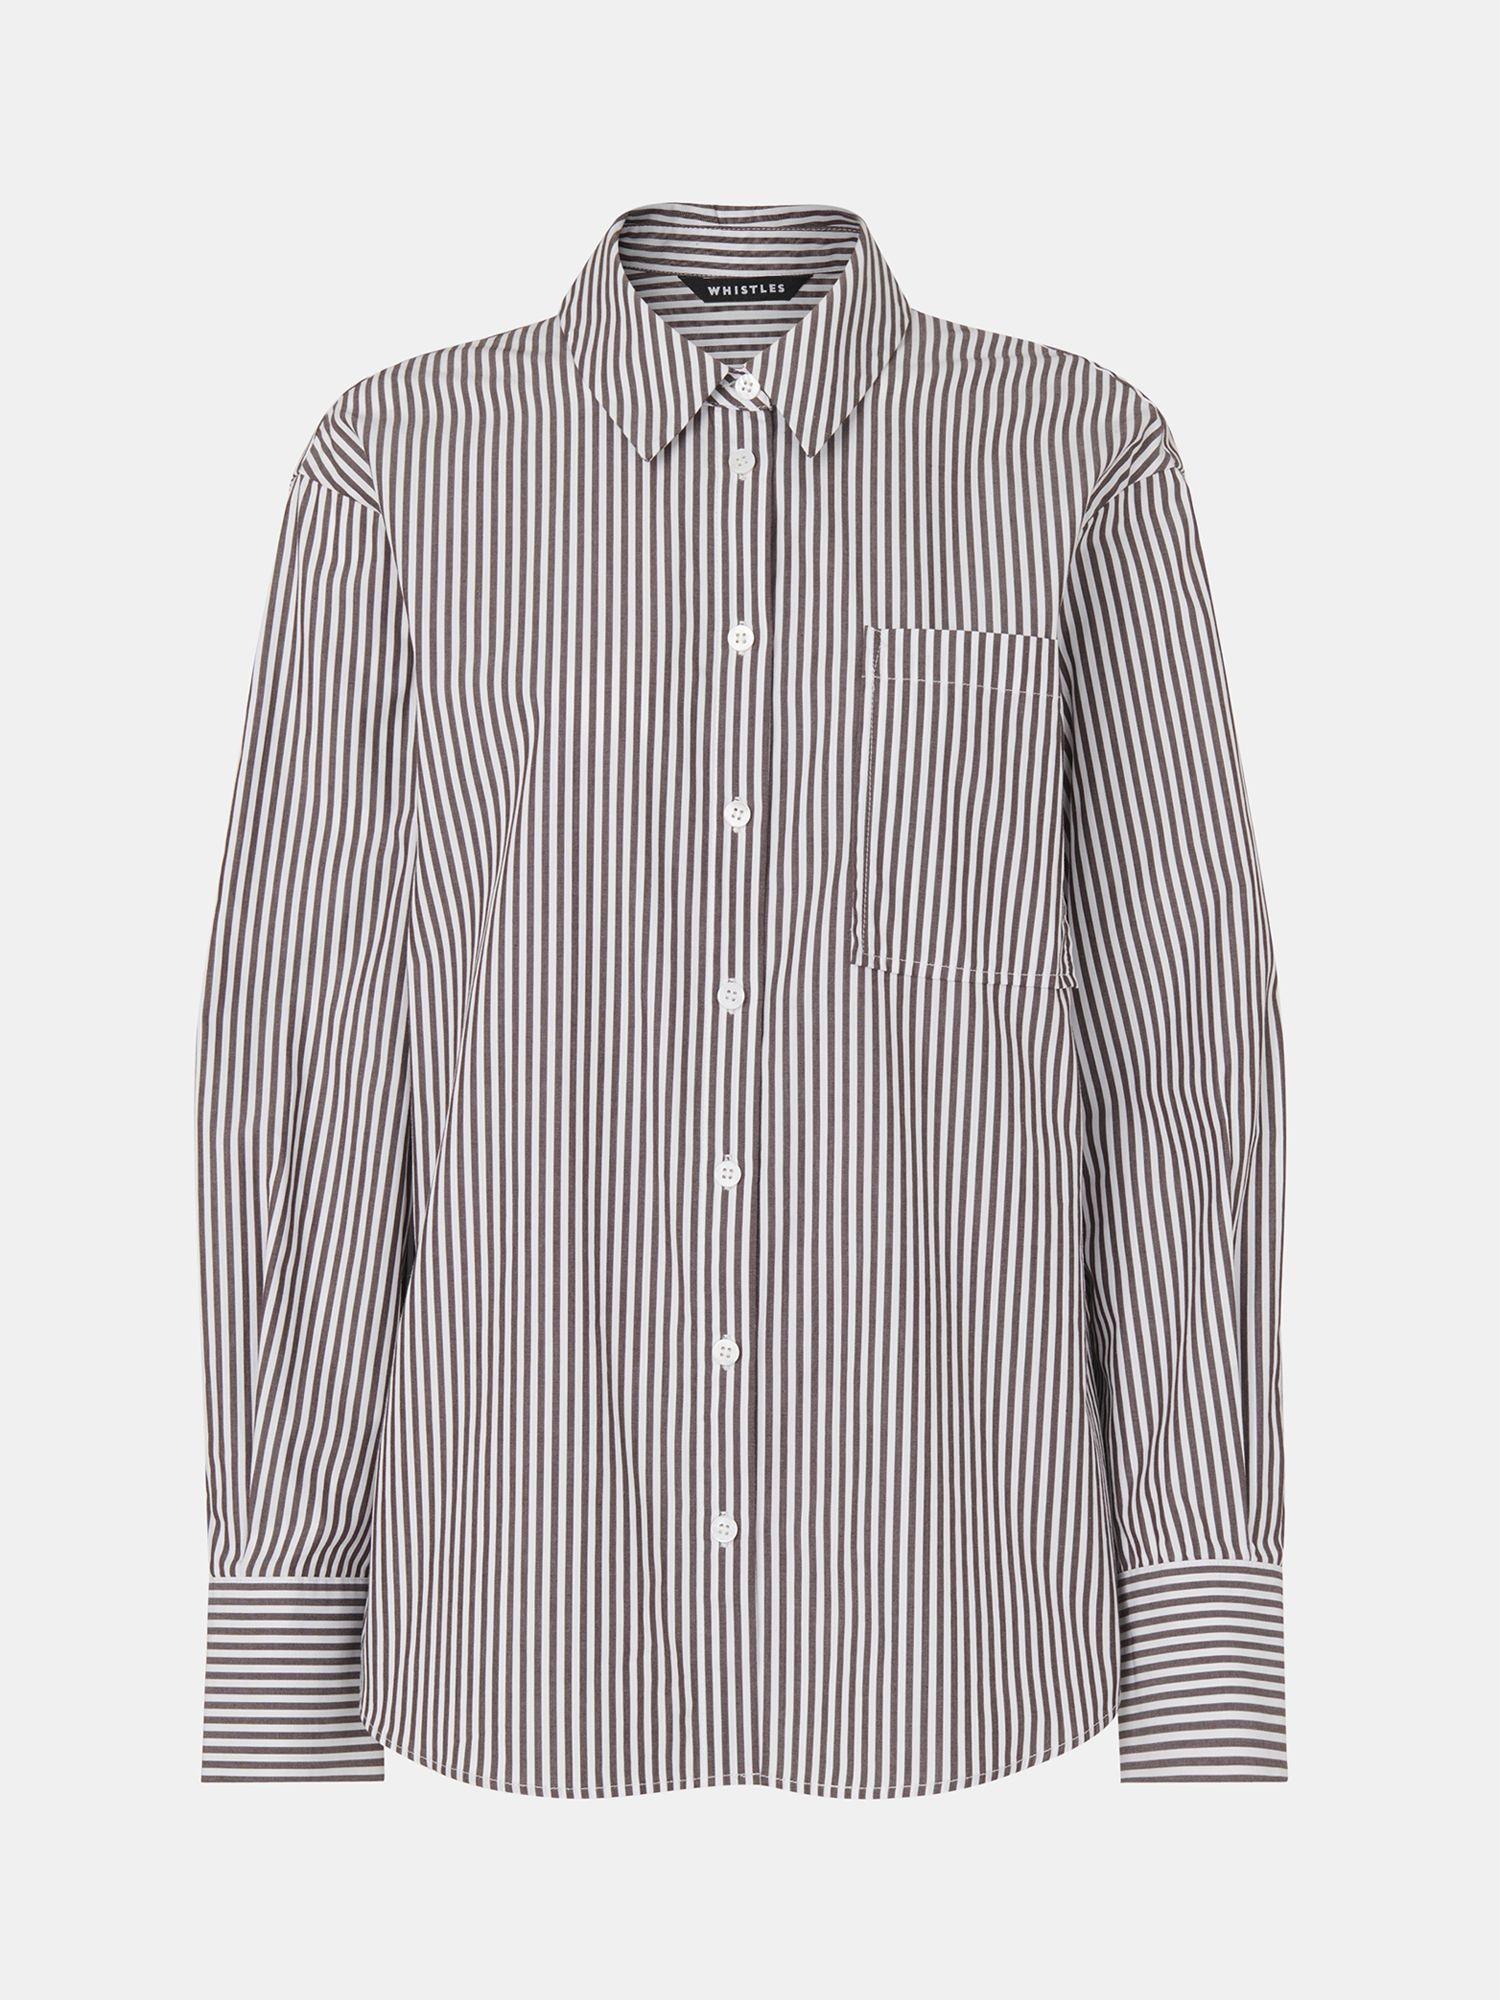 Whistles Striped Relaxed Fit Shirt, Black/White at John Lewis & Partners